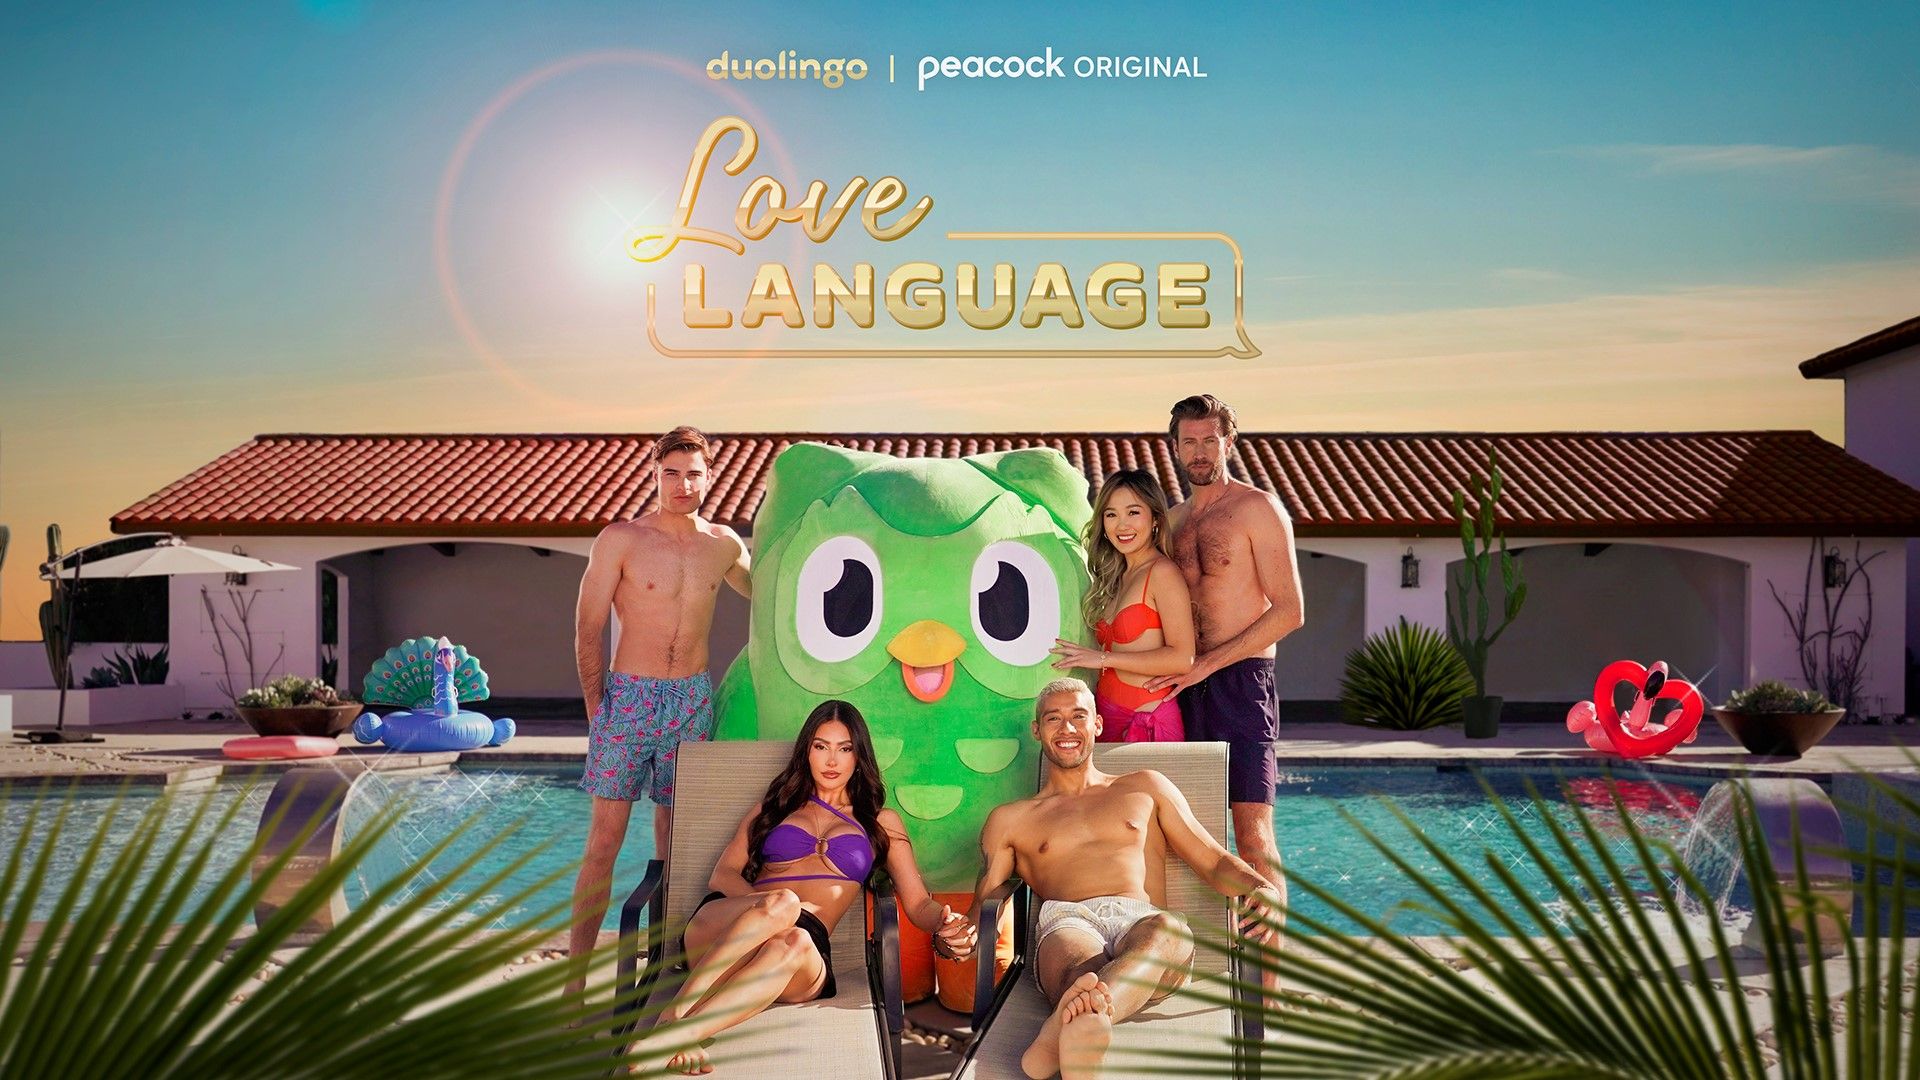 Peacock, Duolingo Promote Fake Reality Show For April Fools’ Day Next TV